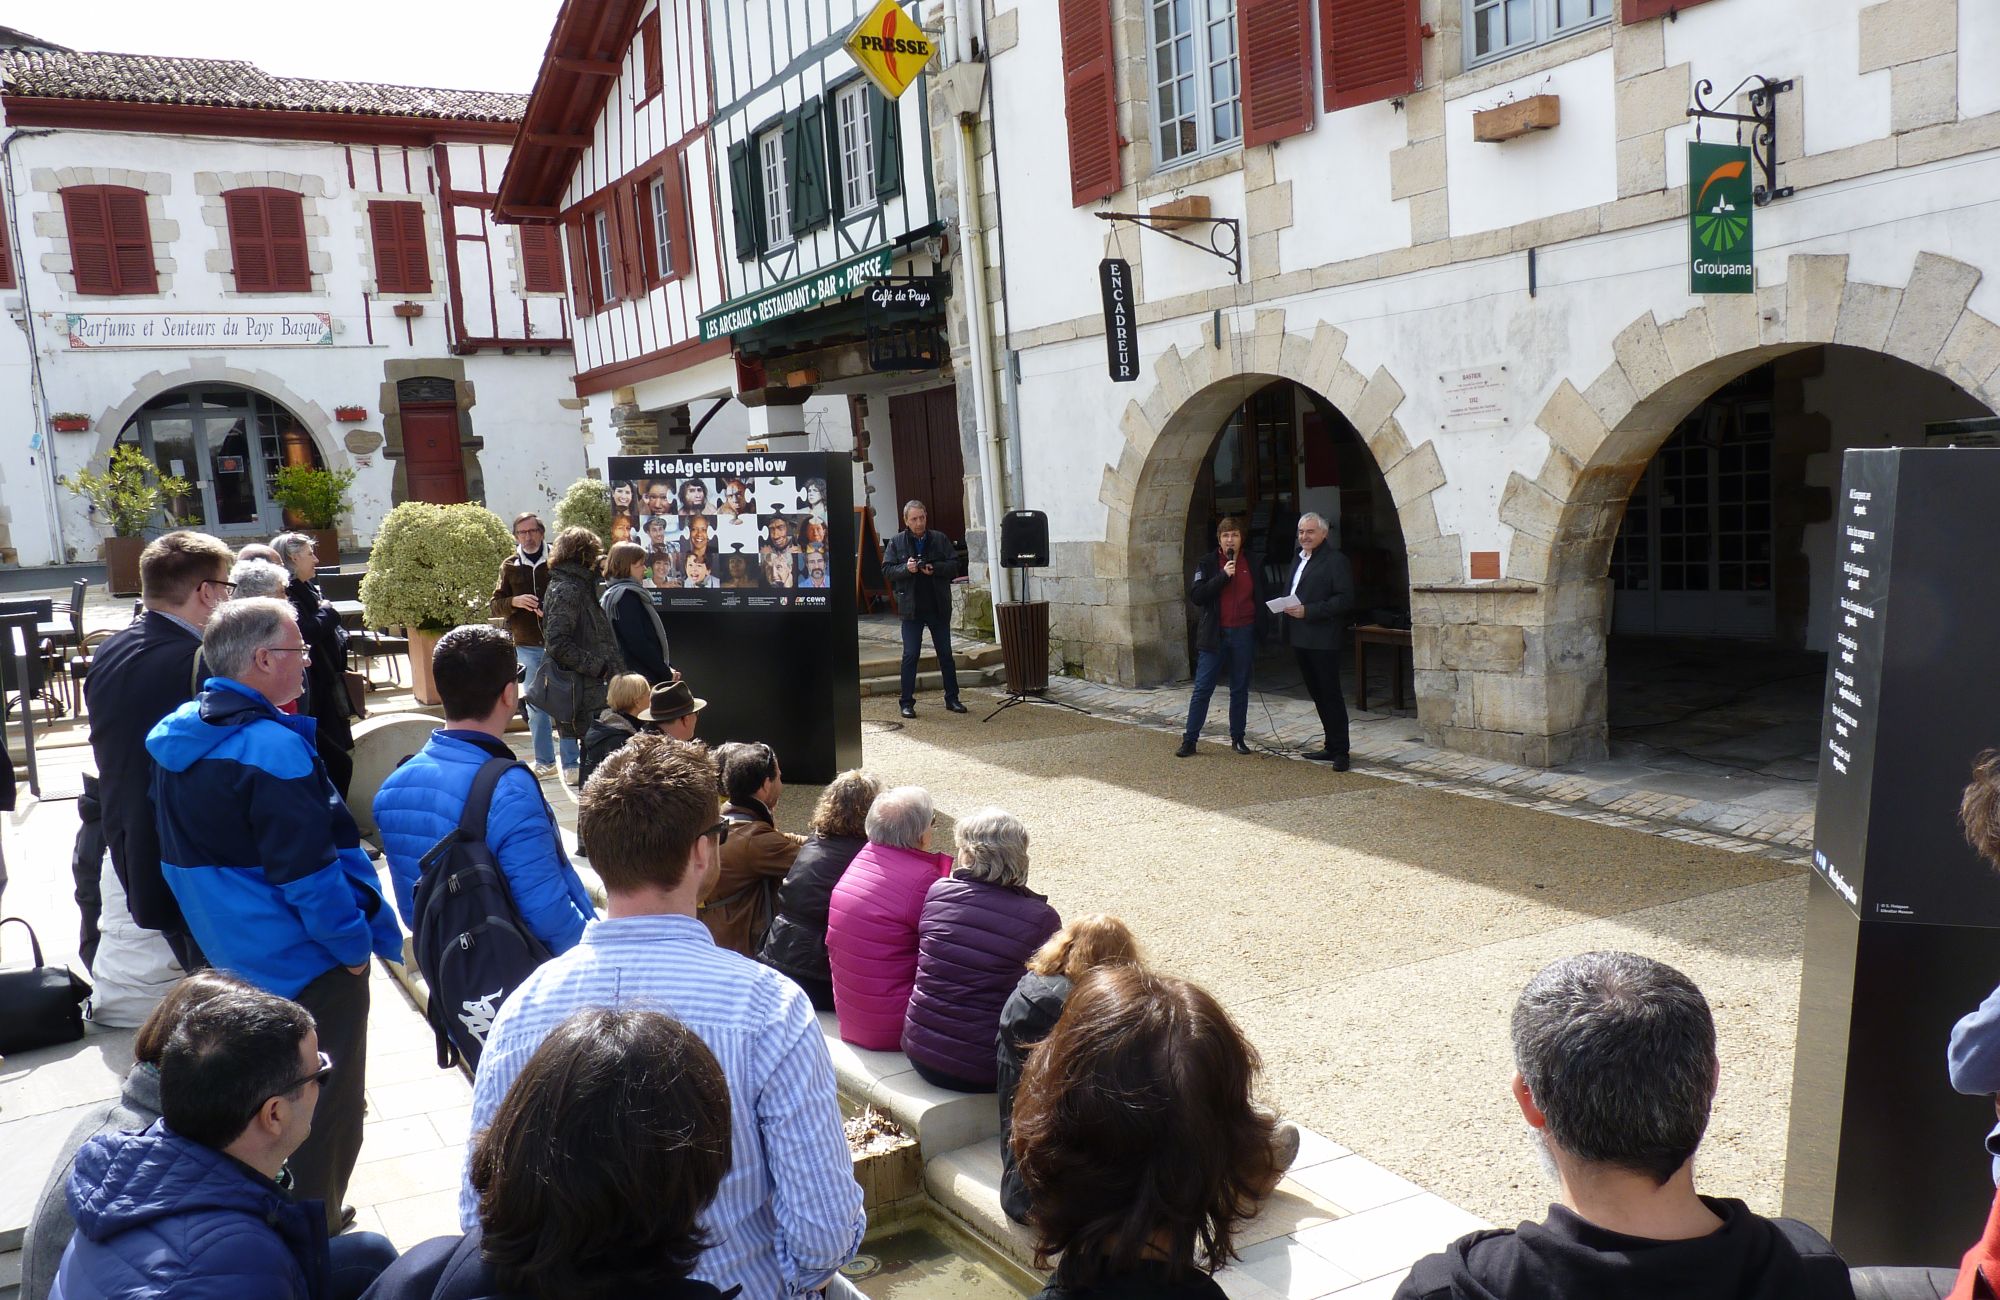 People listening to an opening speech amidst large photo panels in a picturesque town square